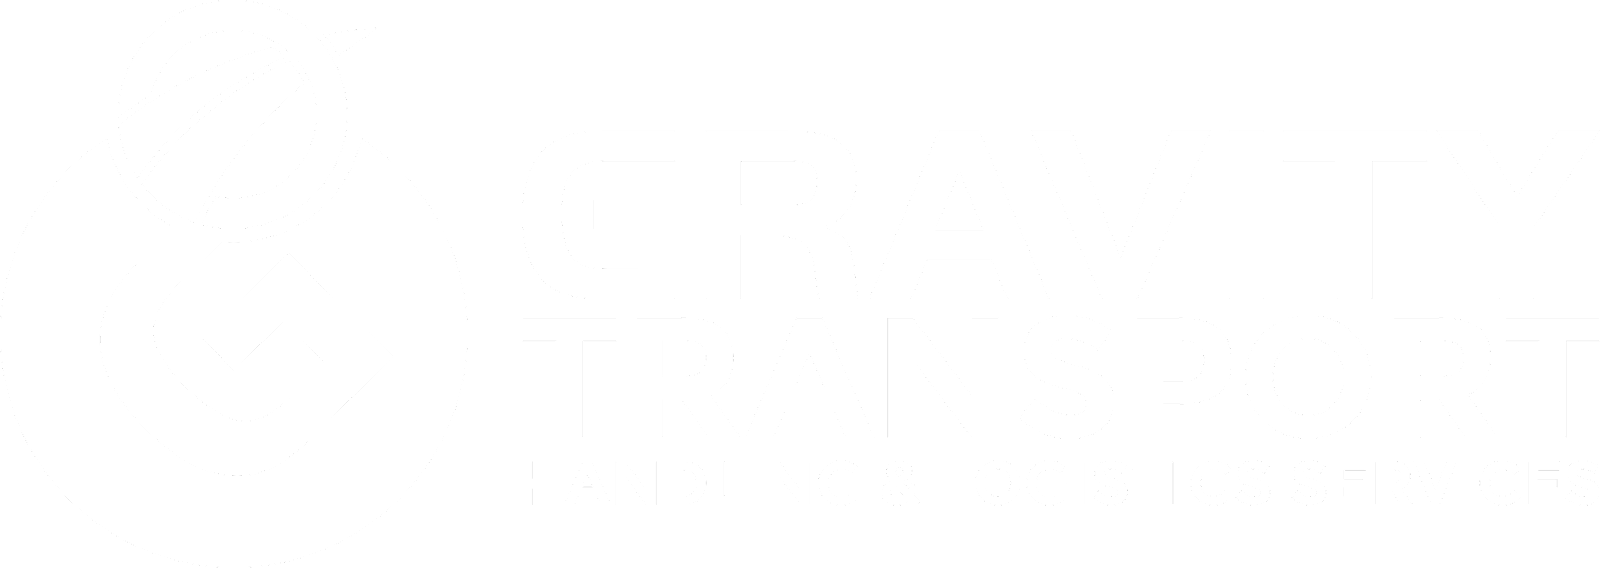 Gravity Transport and Handling Services in Zimbabwe